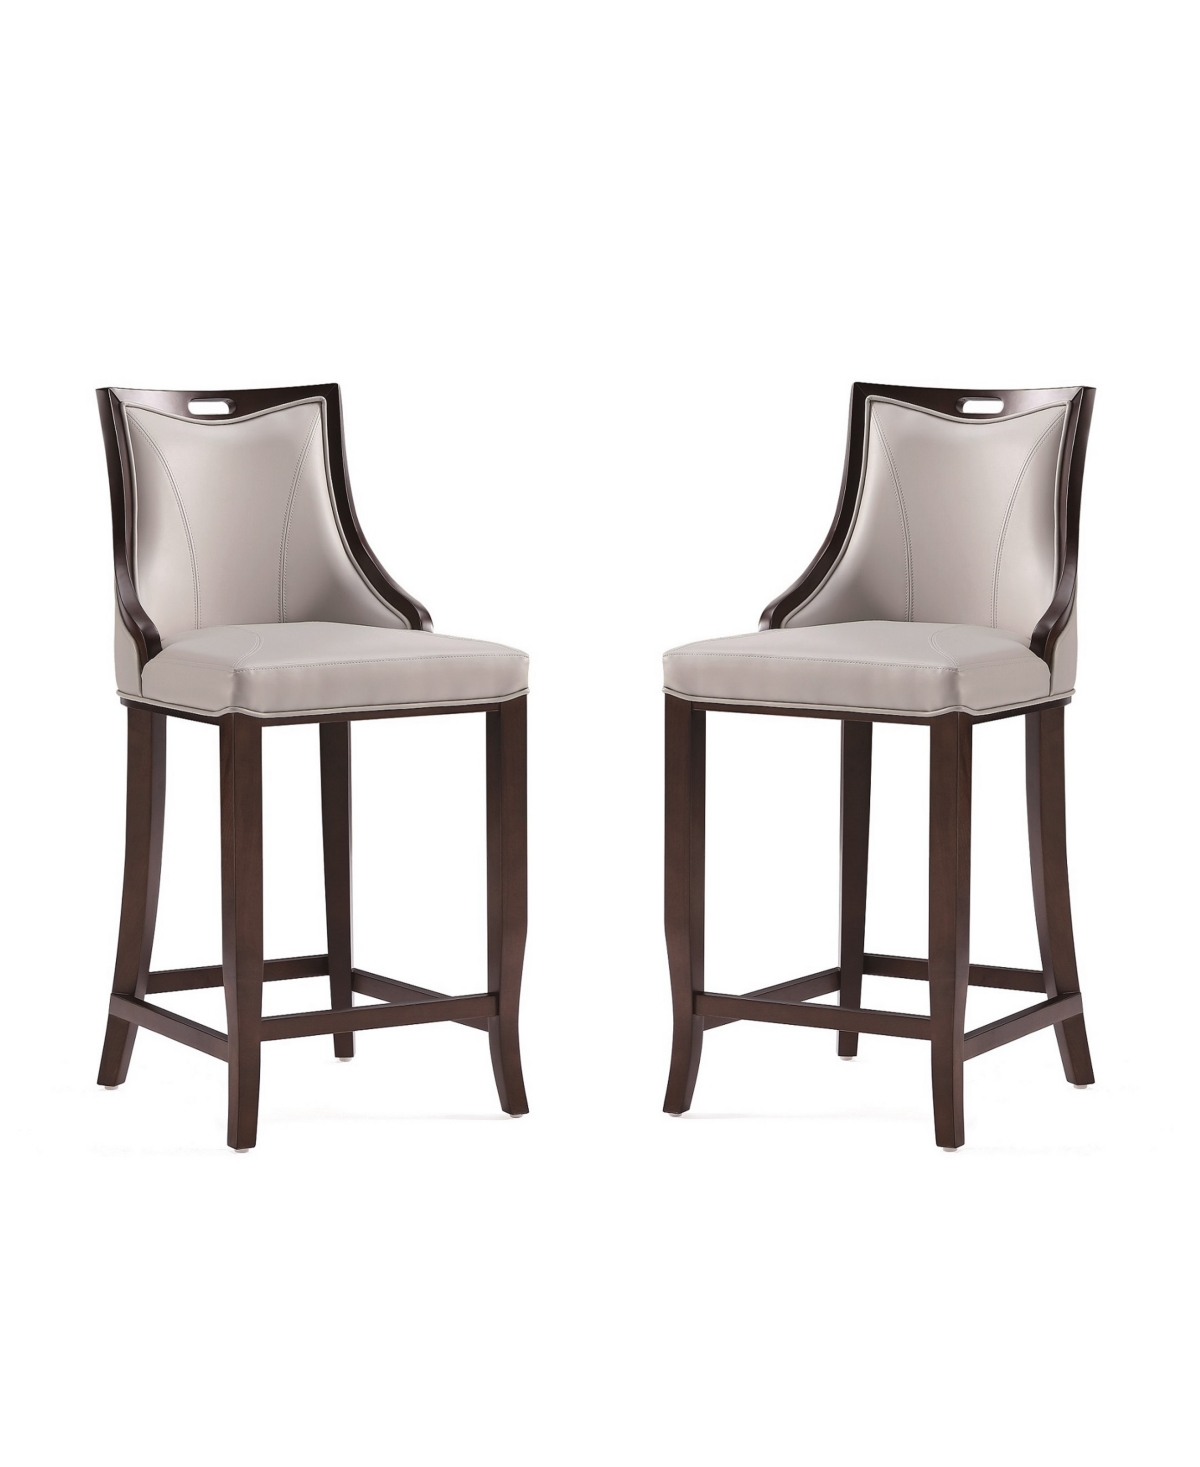 Manhattan Comfort Emperor 19" 2 Piece Beech Wood Faux Leather Upholstered Barstool Set In Light Gray